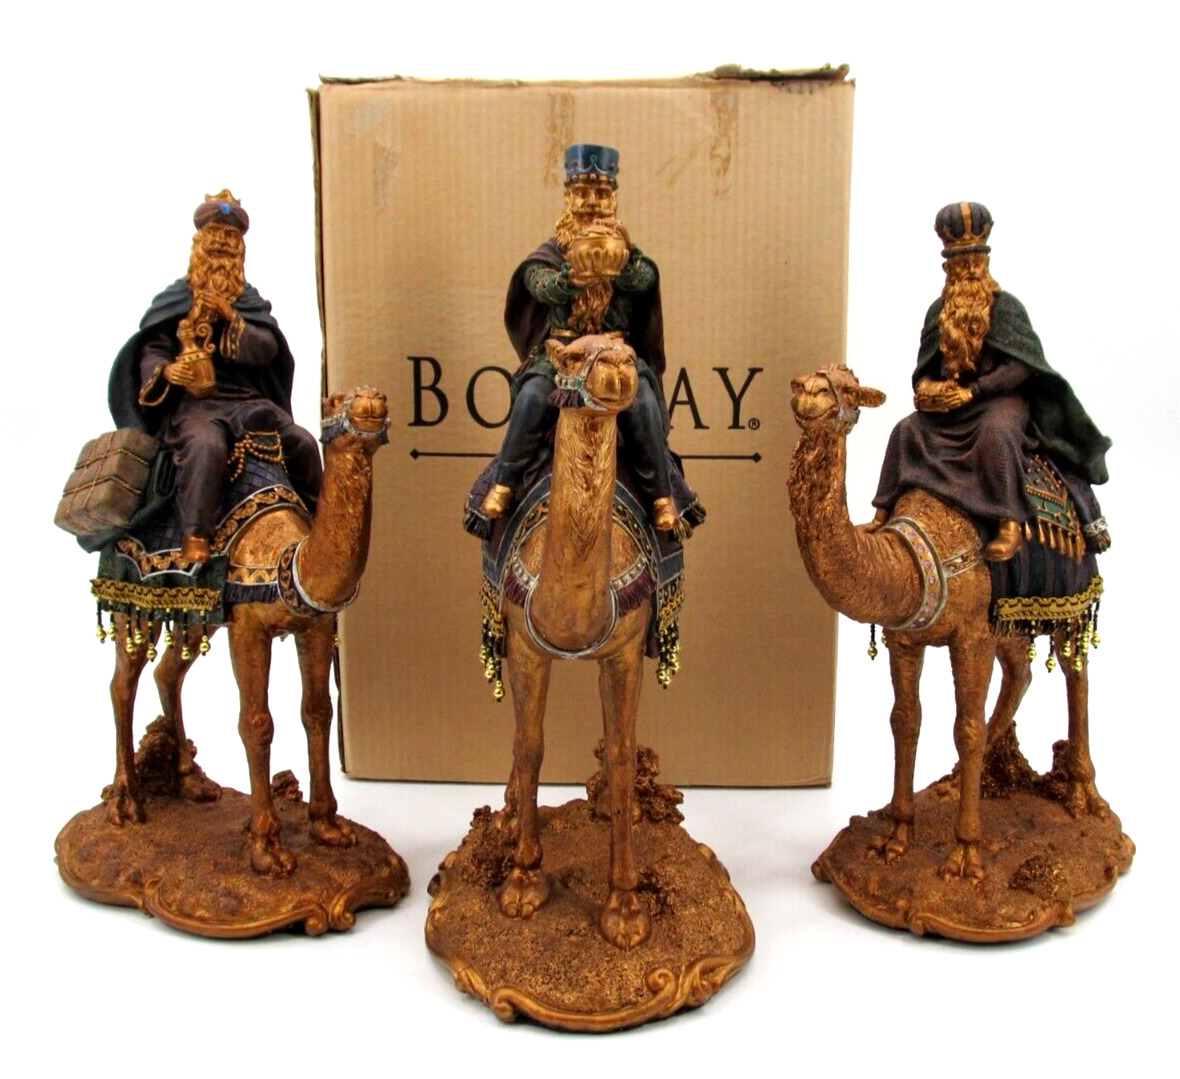 Vtg 2002 Bombay Three Wise Men Christmas Figure Gold Camel Collectible Holiday